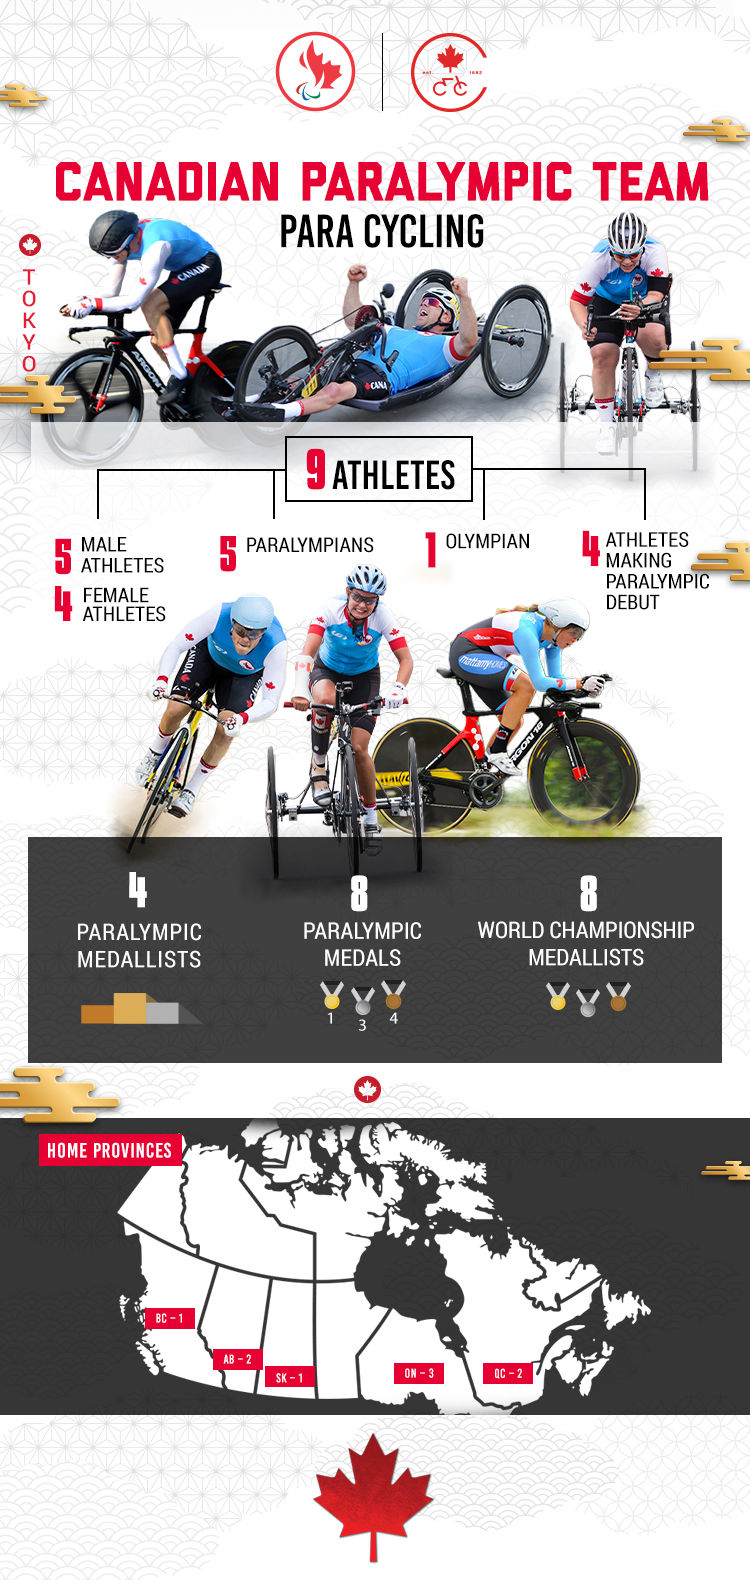 An infographic showing various stats about the Tokyo 2020 Canadian Paralympic cycling team